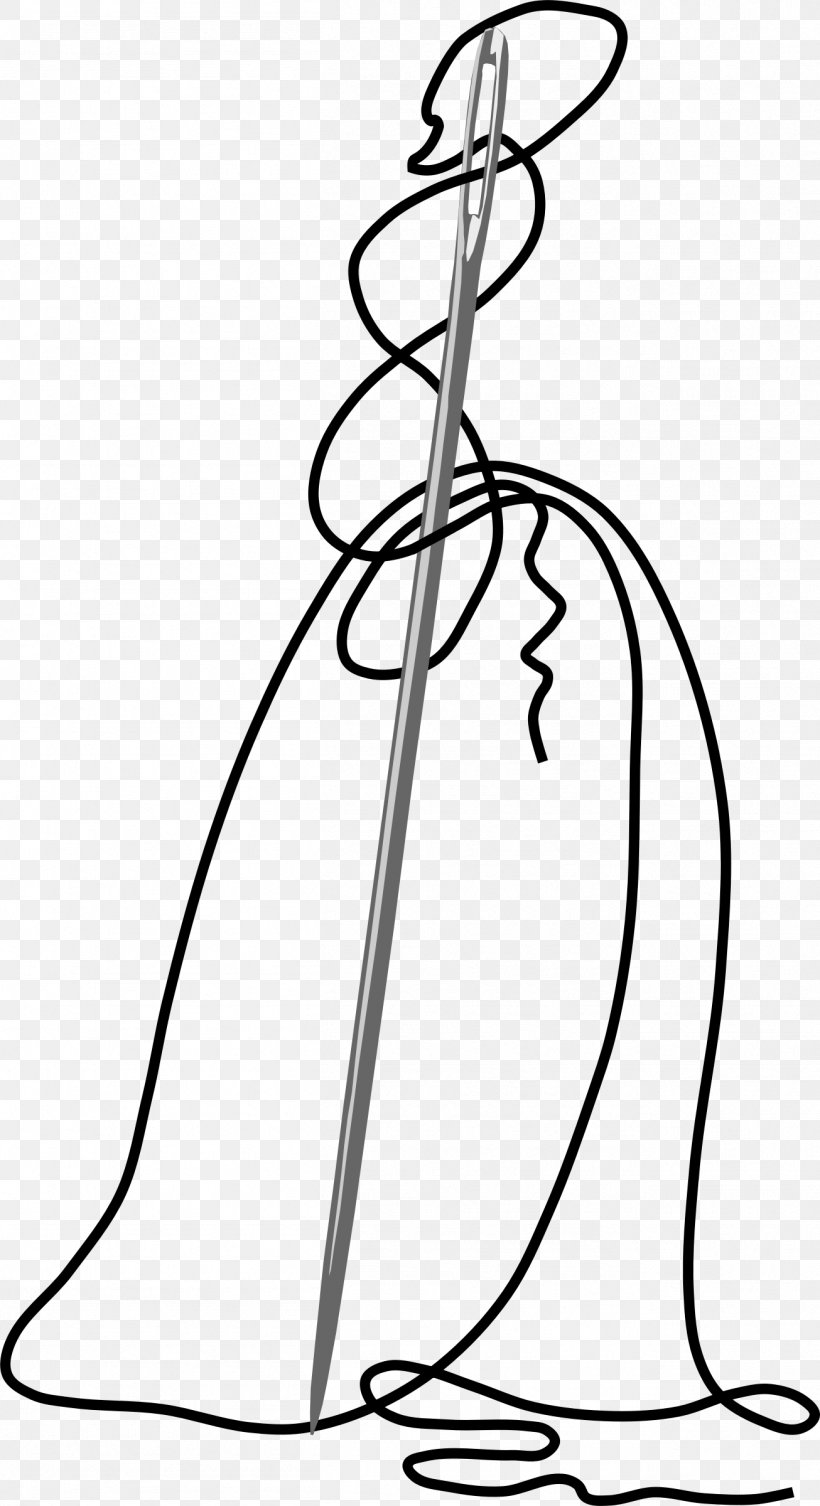 Hand-Sewing Needles Knitting Needle Clip Art, PNG, 1306x2400px, Handsewing Needles, Art, Black And White, Knitting, Knitting Needle Download Free